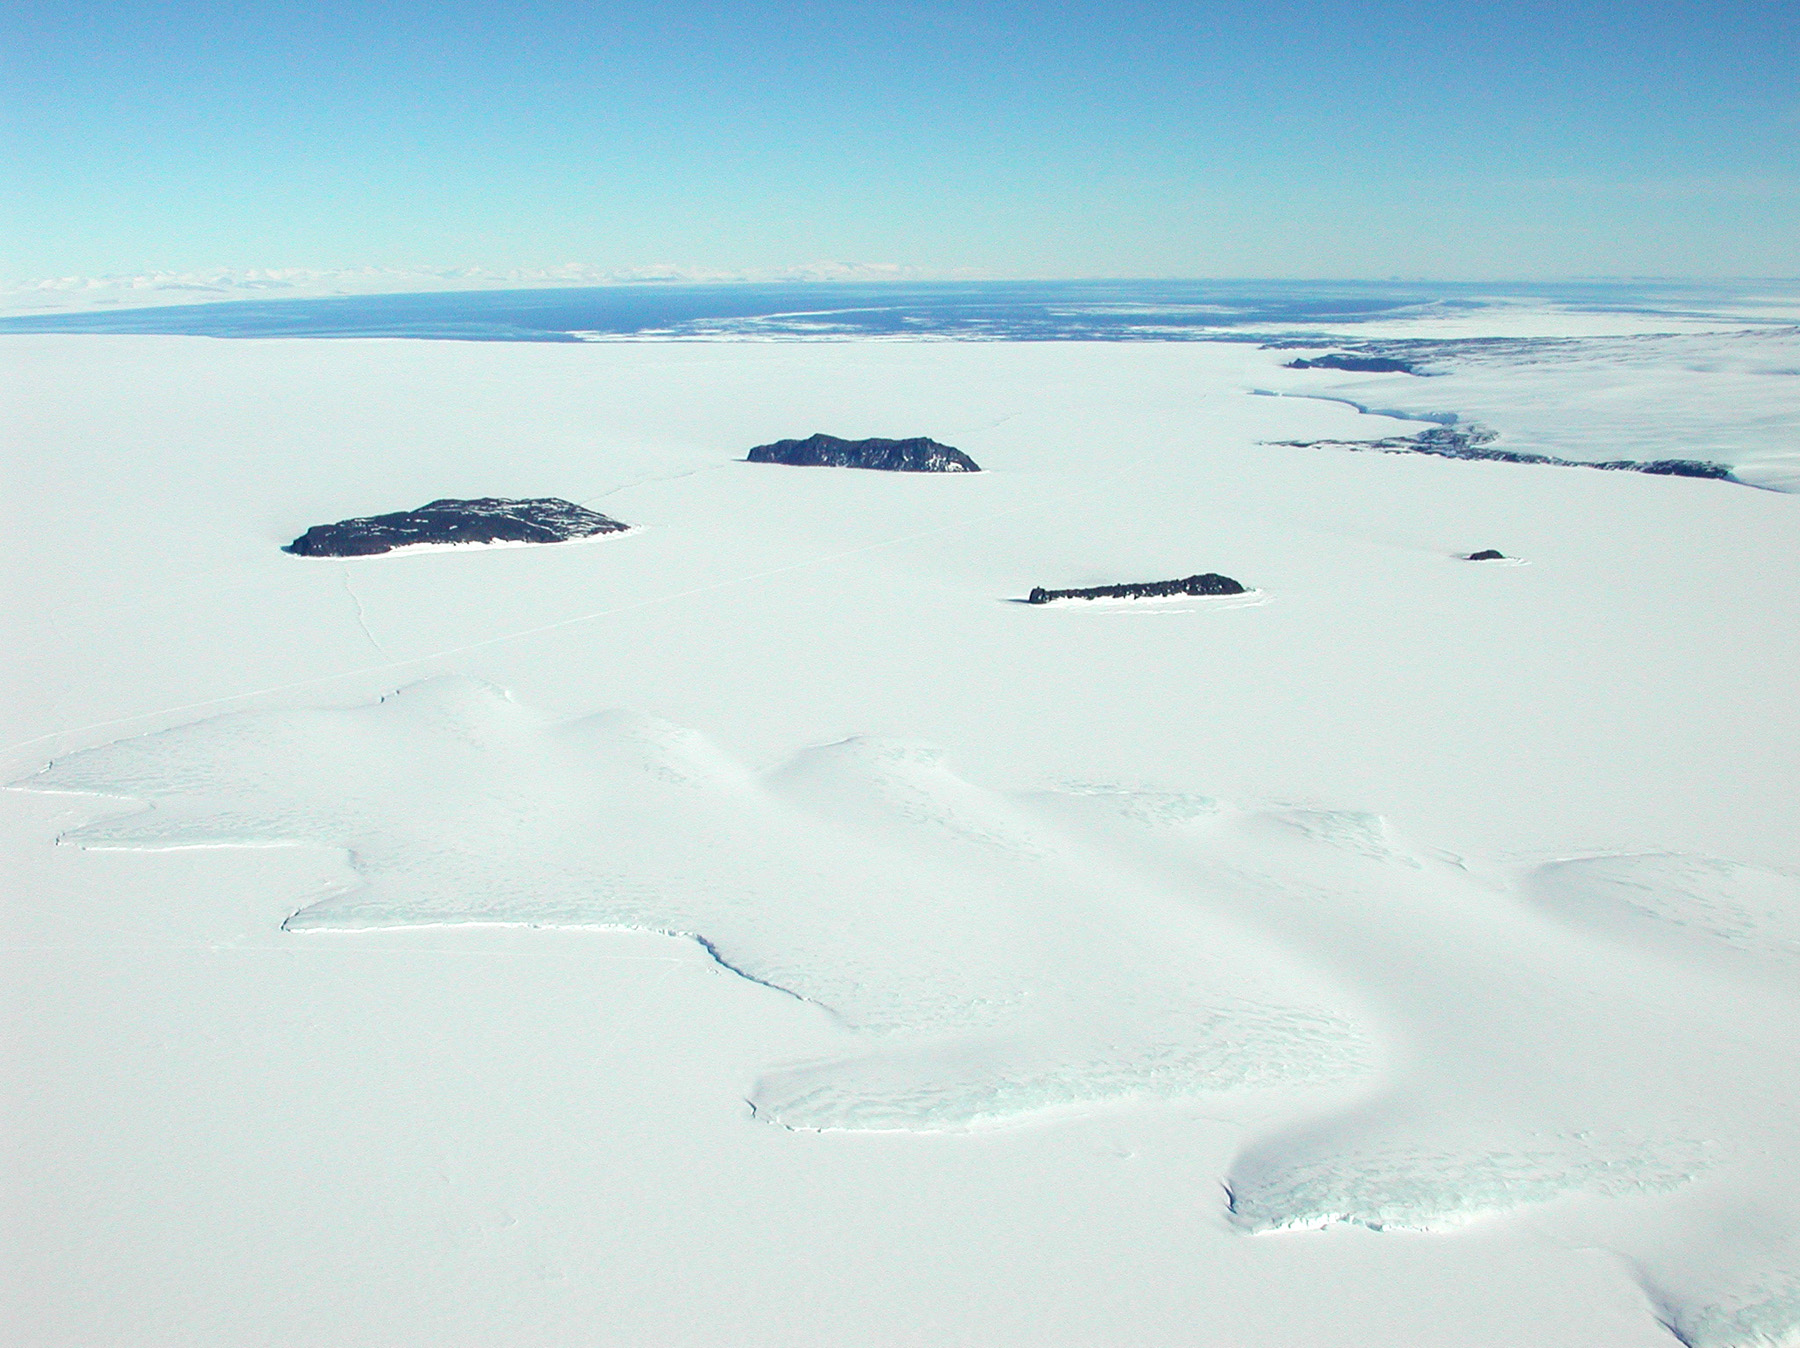 Aerial view of ice covered ocean, with small islands portruding through the ice.